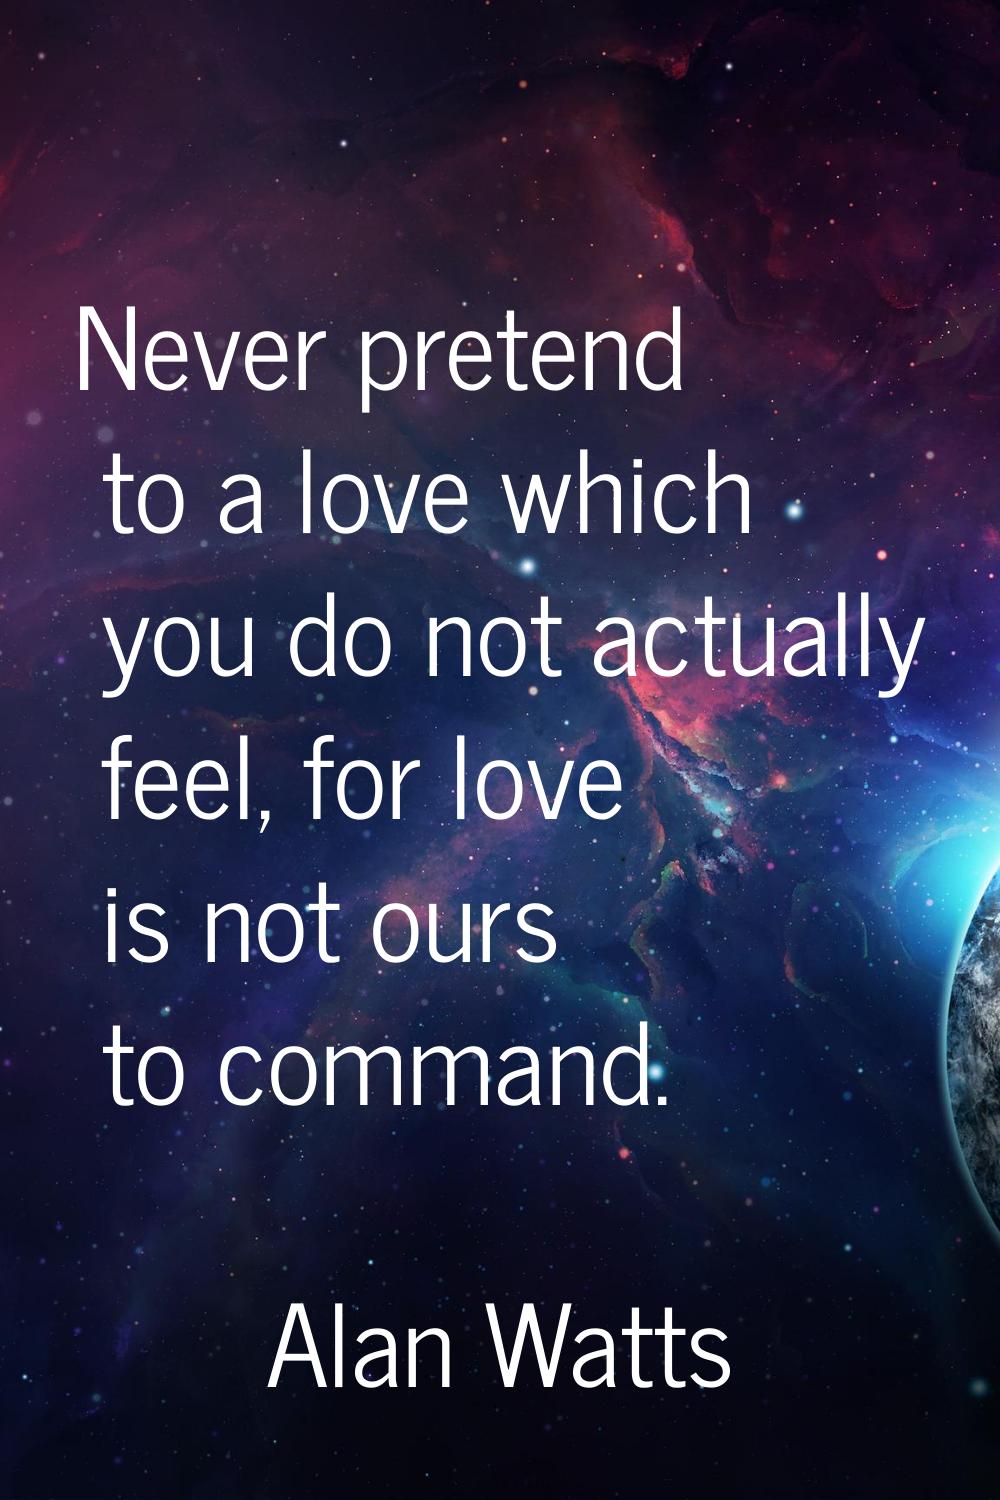 Never pretend to a love which you do not actually feel, for love is not ours to command.